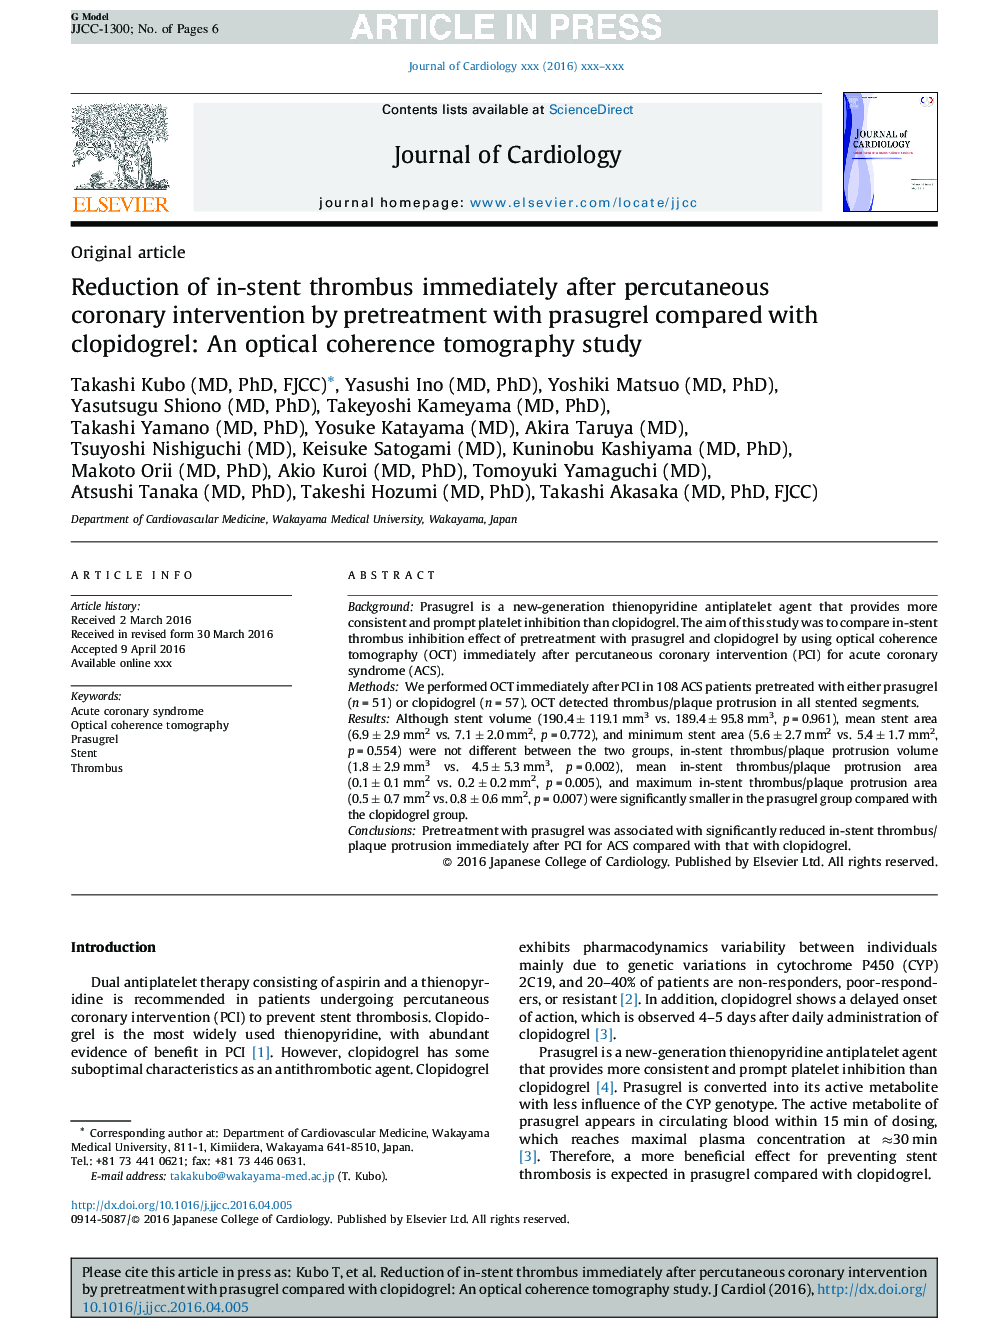 Reduction of in-stent thrombus immediately after percutaneous coronary intervention by pretreatment with prasugrel compared with clopidogrel: An optical coherence tomography study